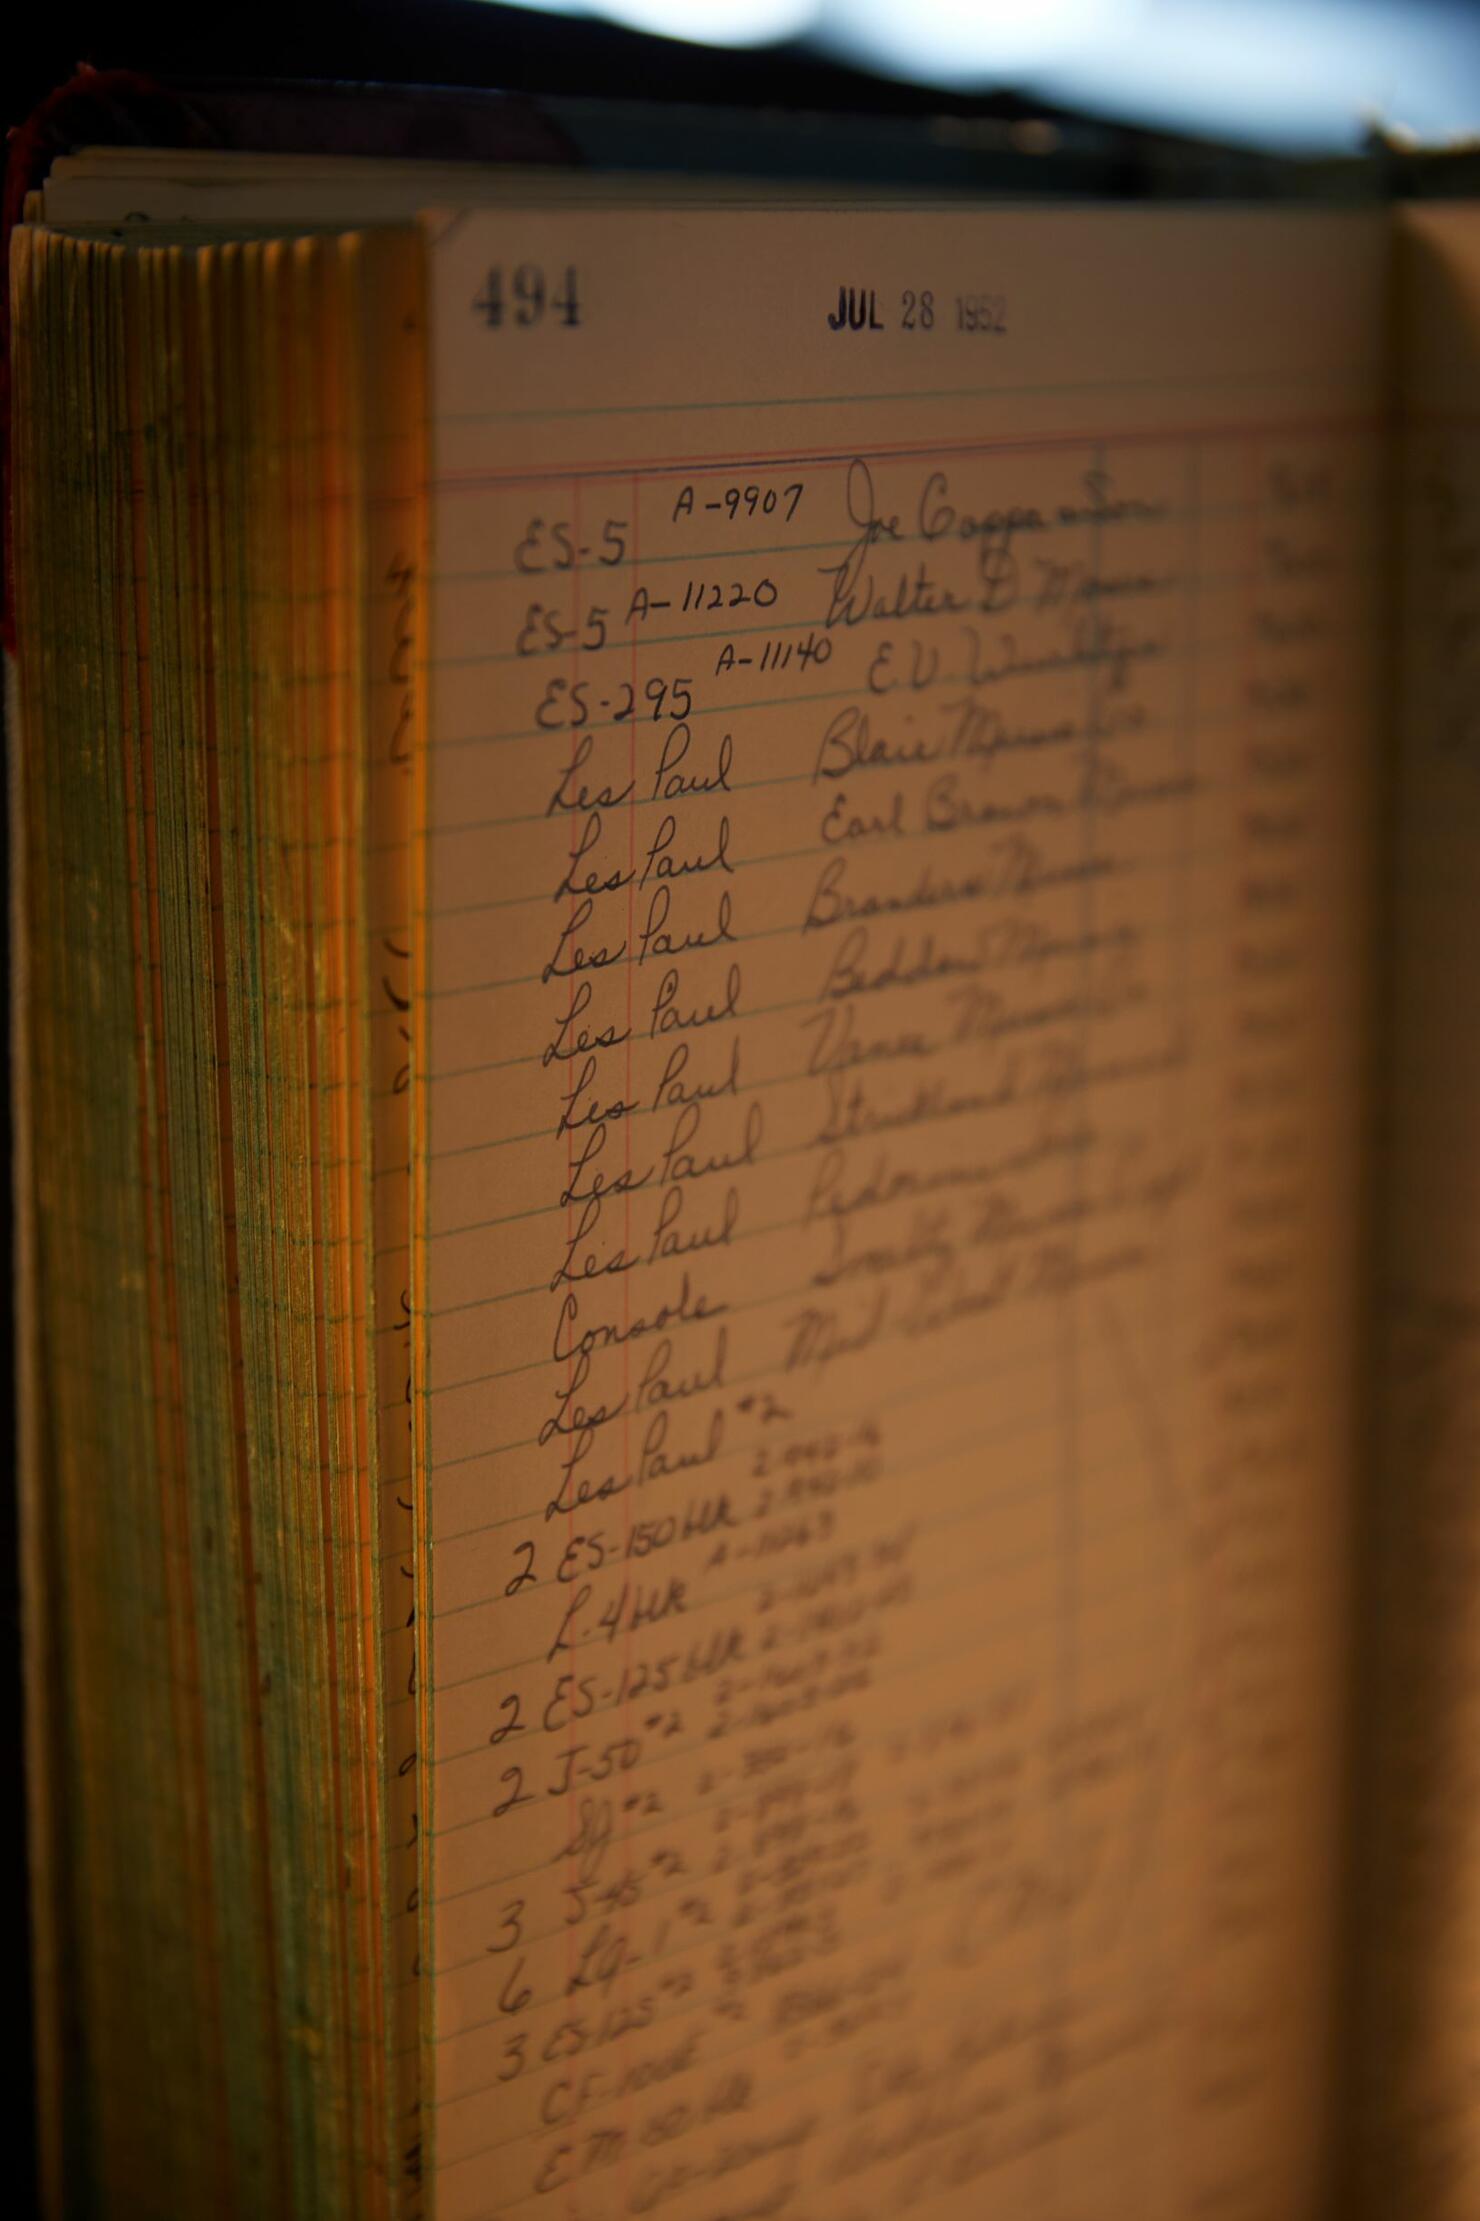 A Gibson shipping ledger from 1952